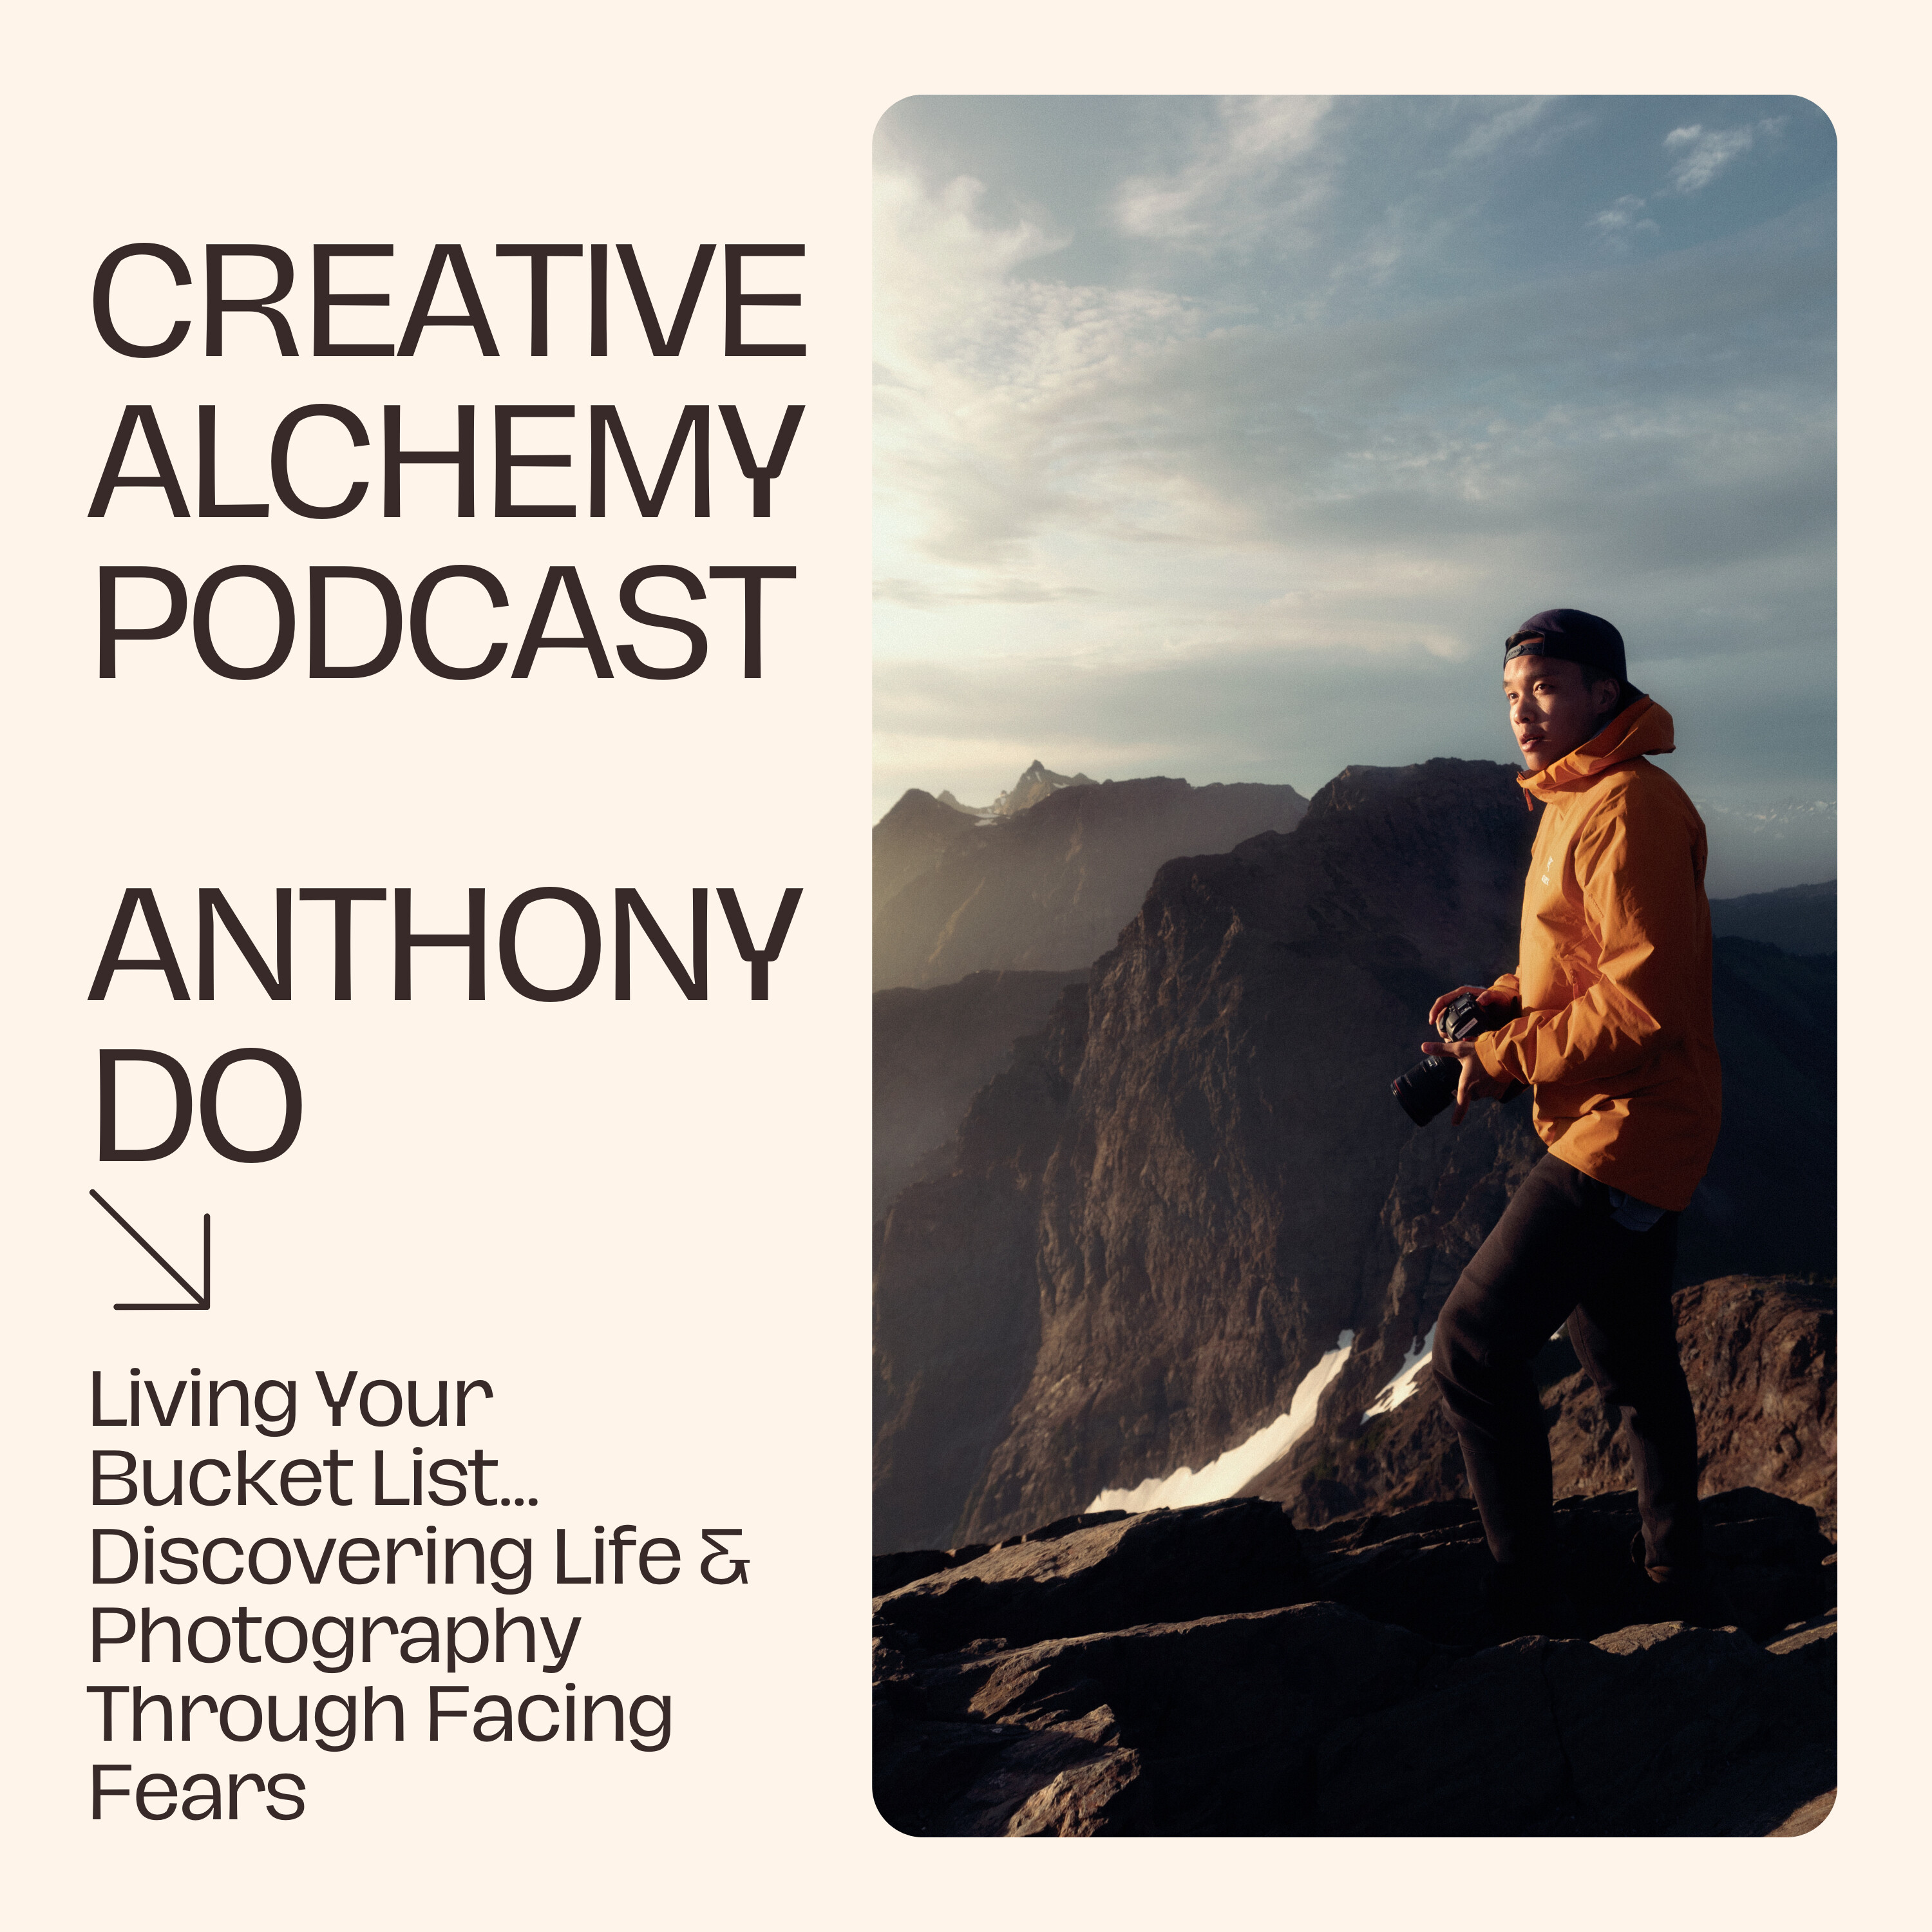 Living Your Bucket List... Discovering Life & Photography Through Facing Fears with Anthony Do